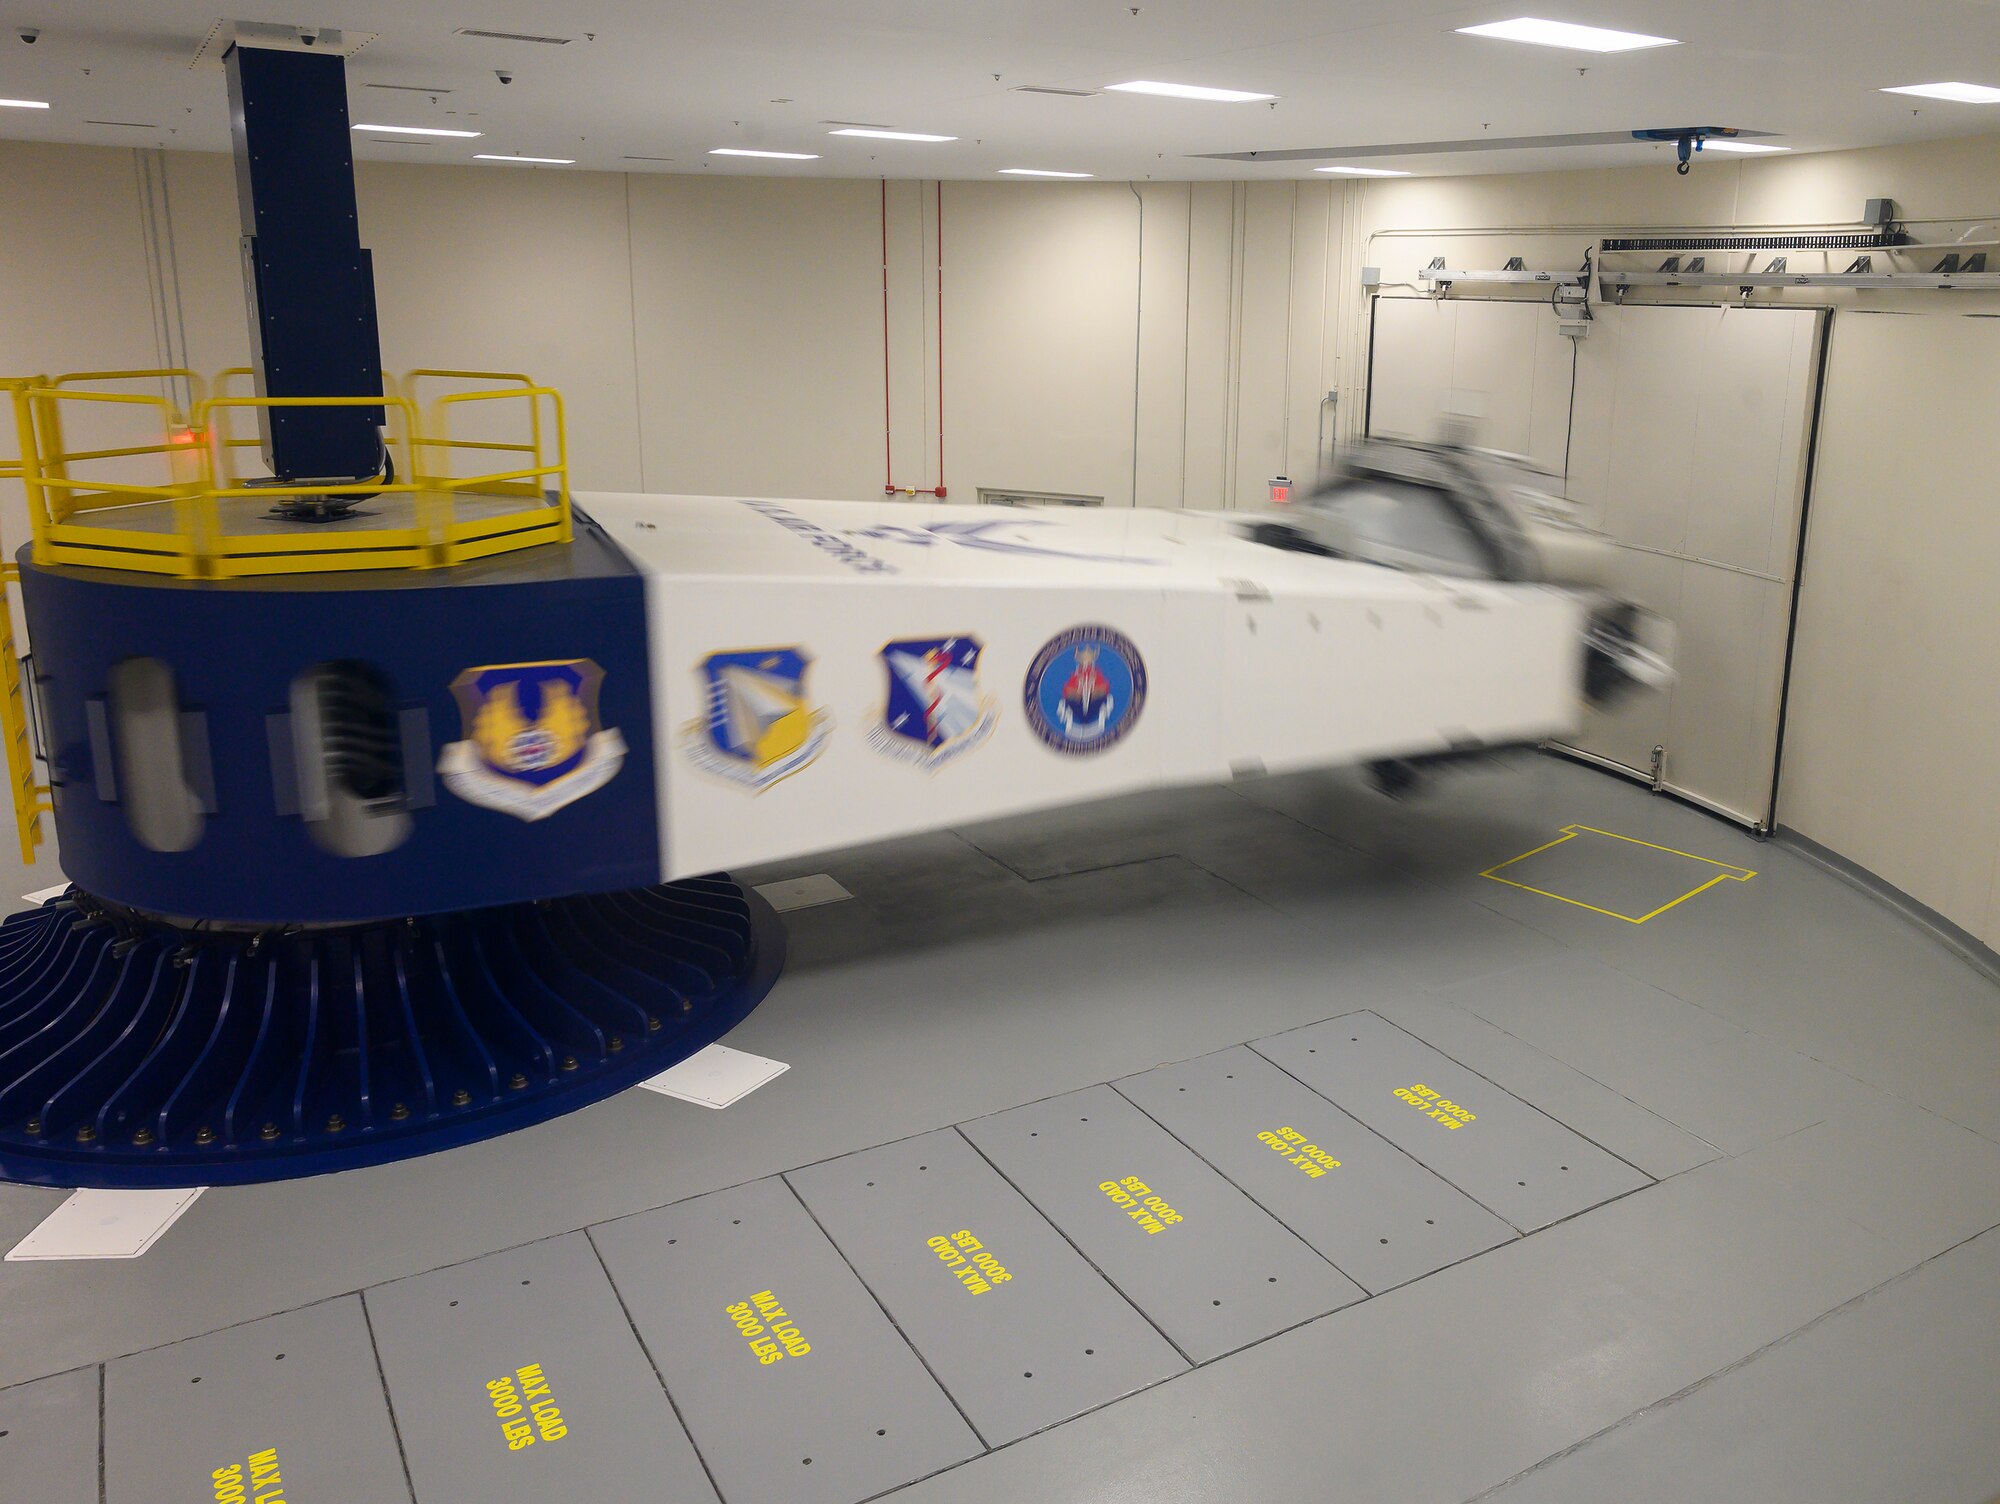 The 711th Human Performance Wing’s centrifuge spins with a test subject inside July 14. The Leadership Dayton class was shown the centrifuge in action while staff discussed the research and training accomplished by the wing. (U.S. Air Force photo by R.J. Oriez)